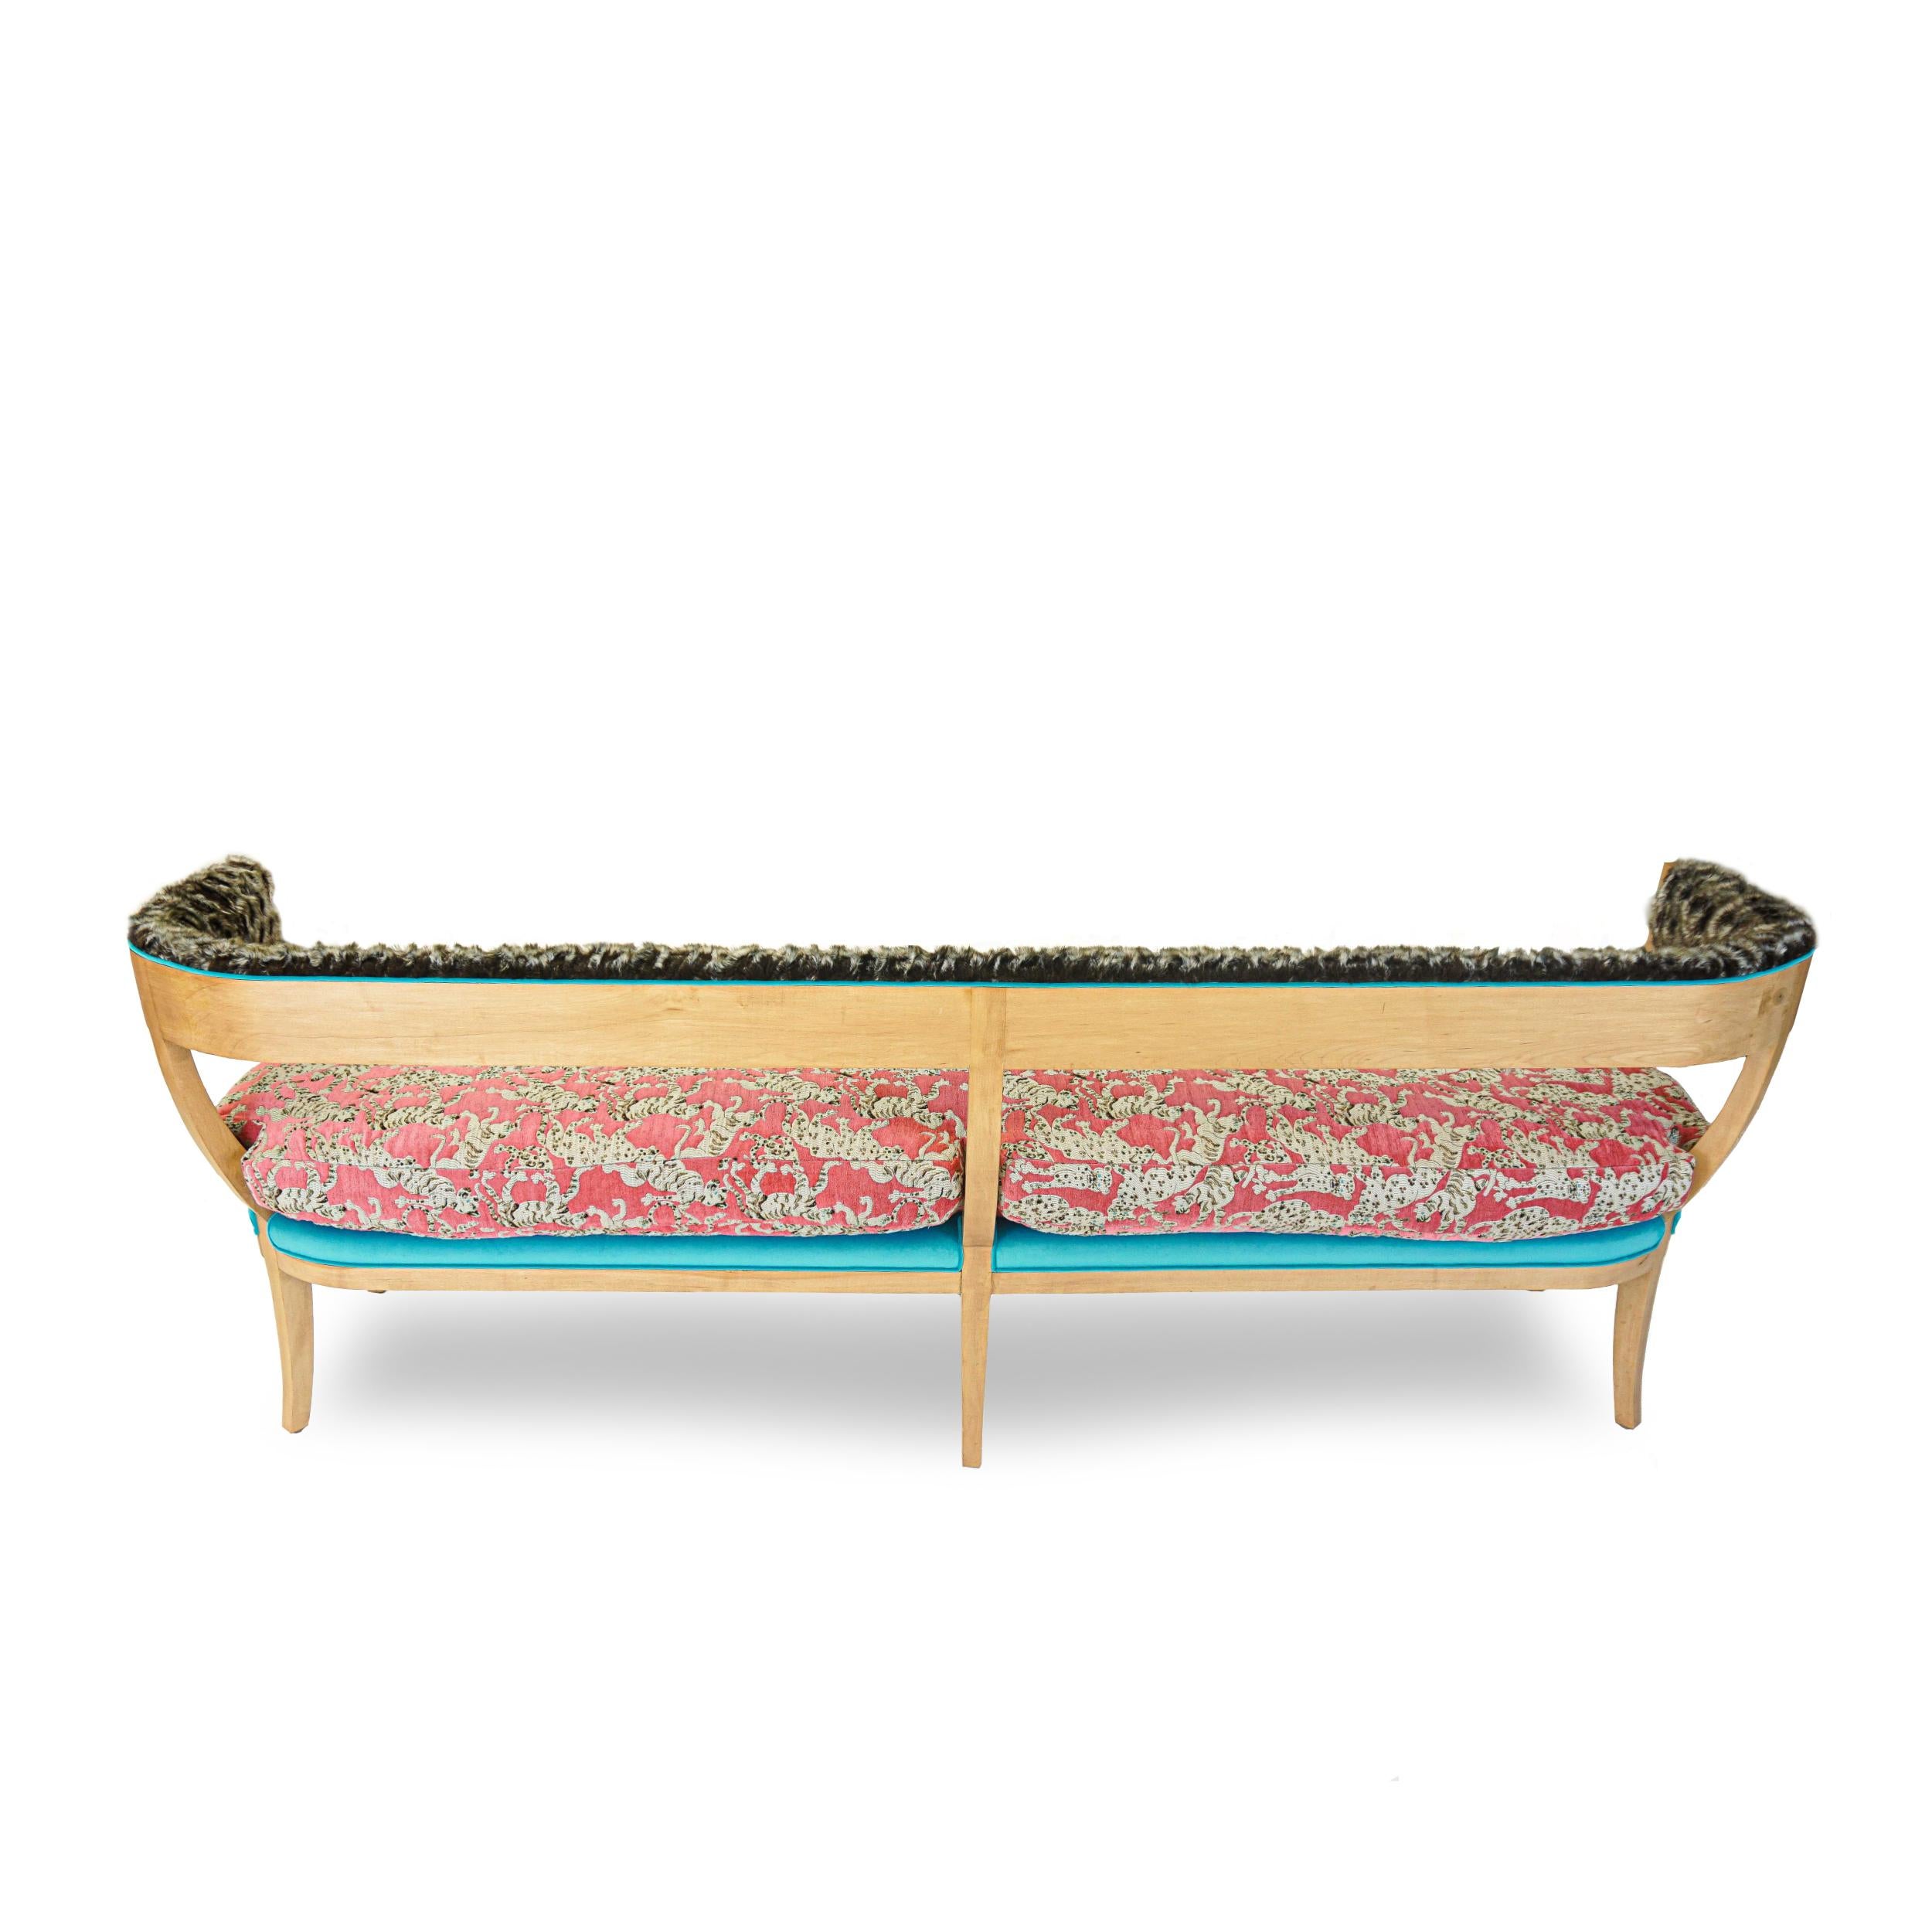 Japanese Inspired Bench with Wild Cat Print and Faux Fur For Sale 2